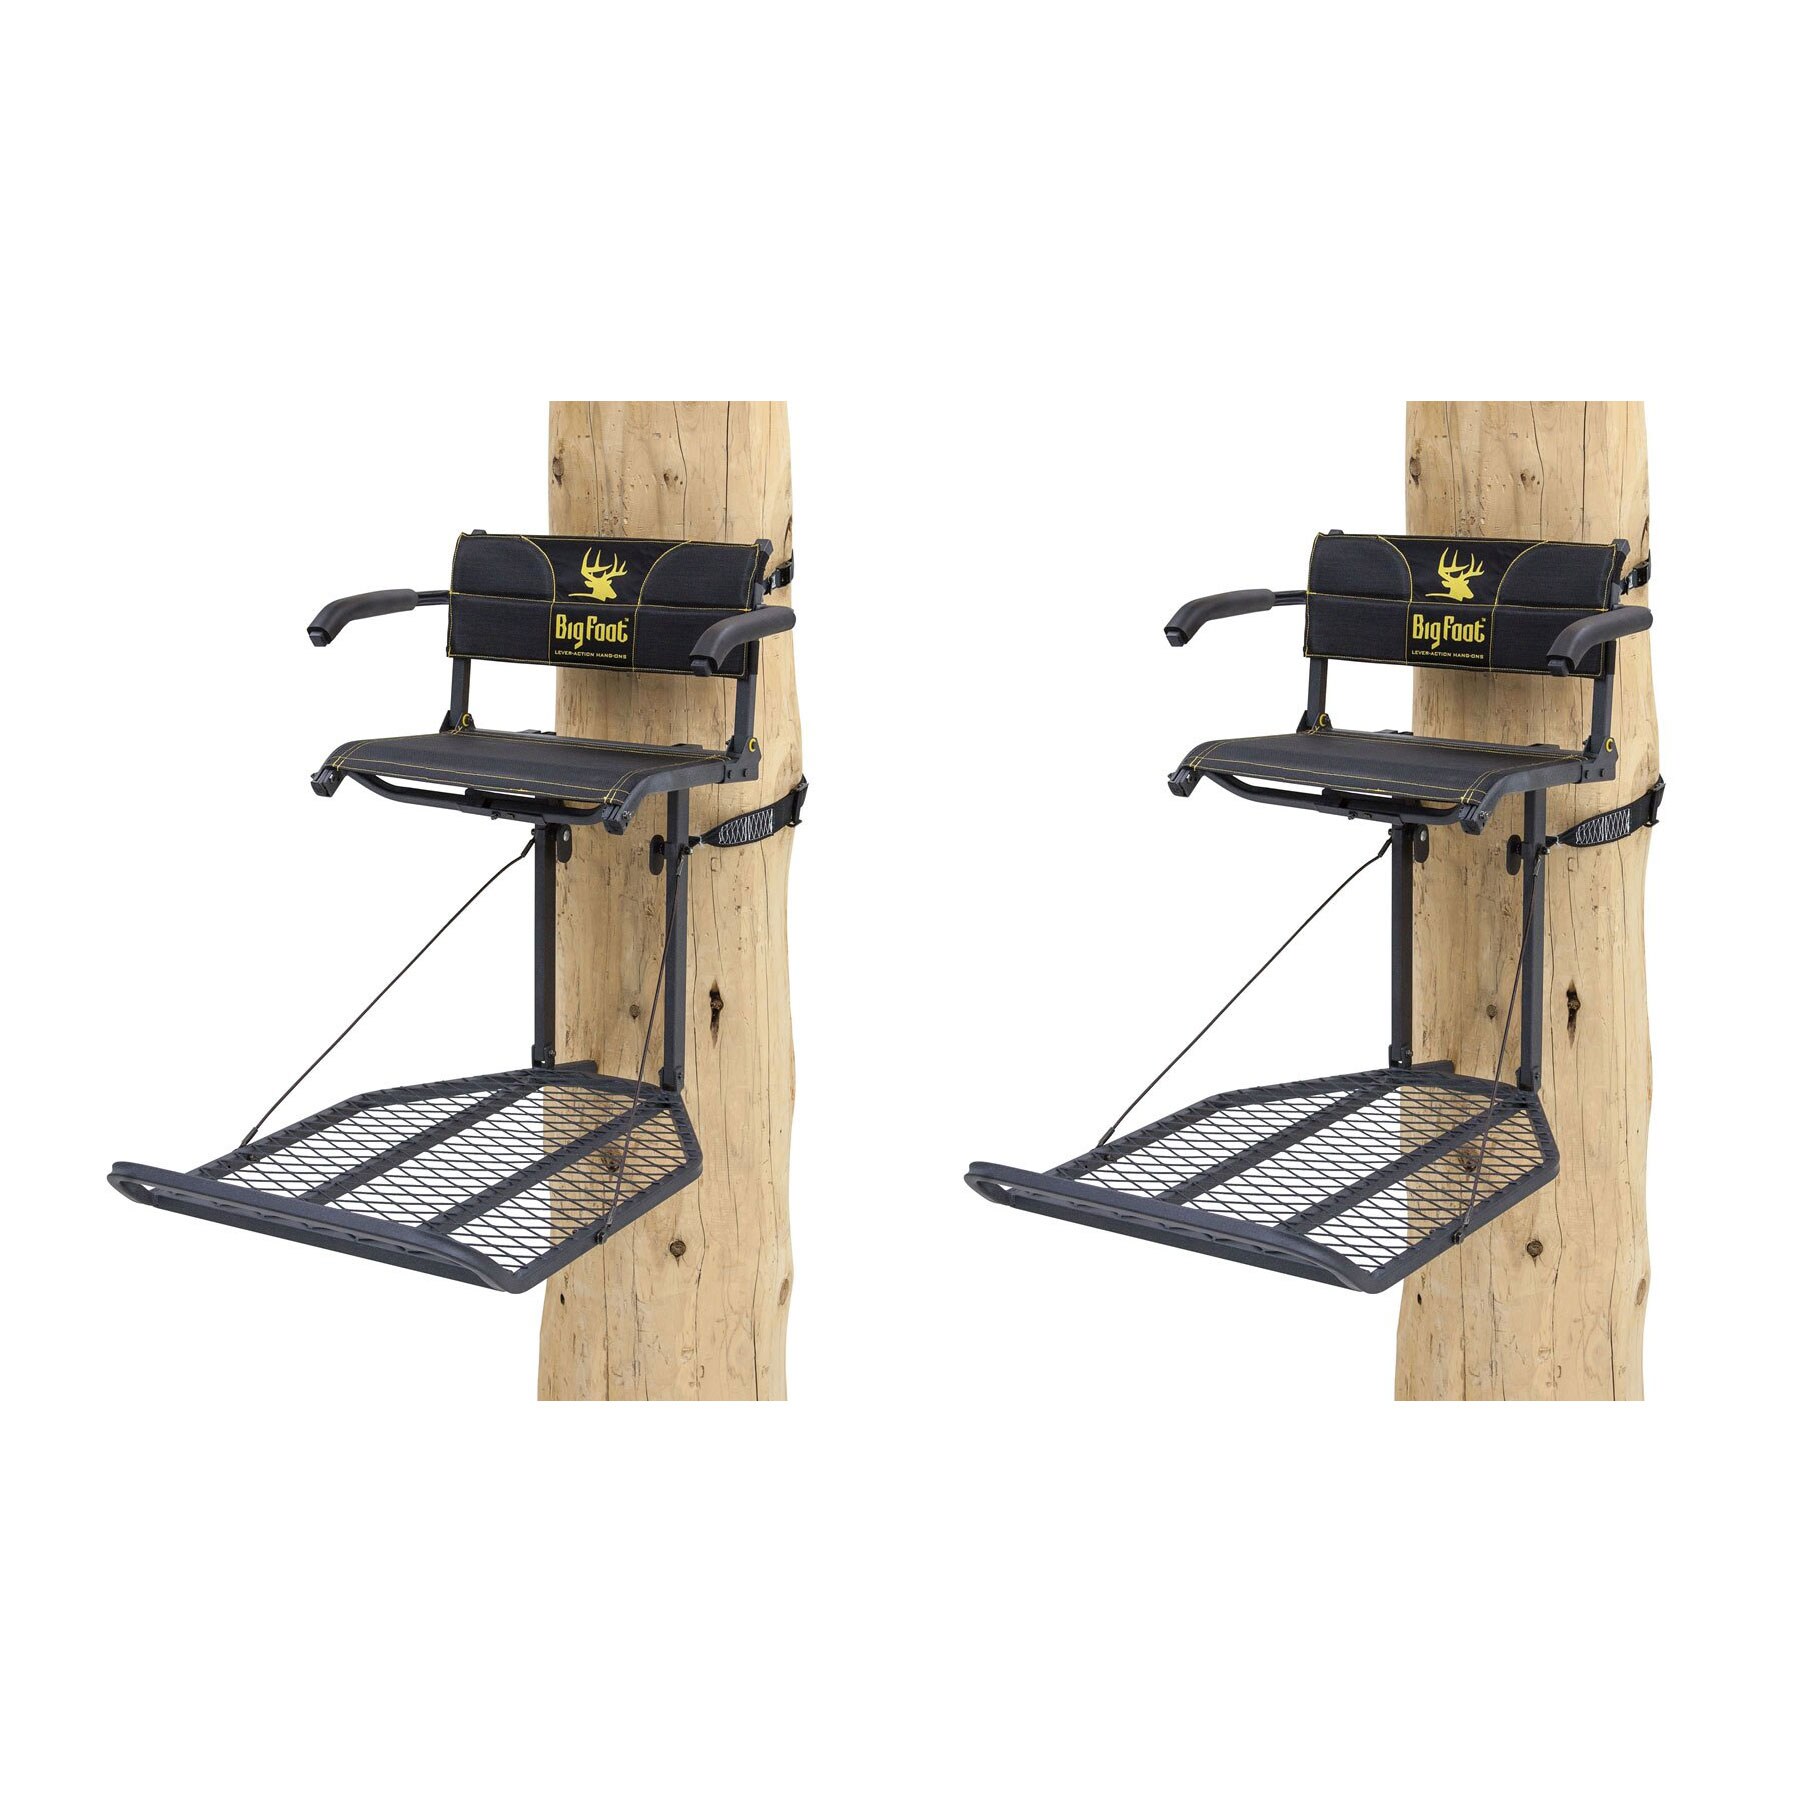 Rivers Edge Big Foot Brute Hang-On Stand for sale online 